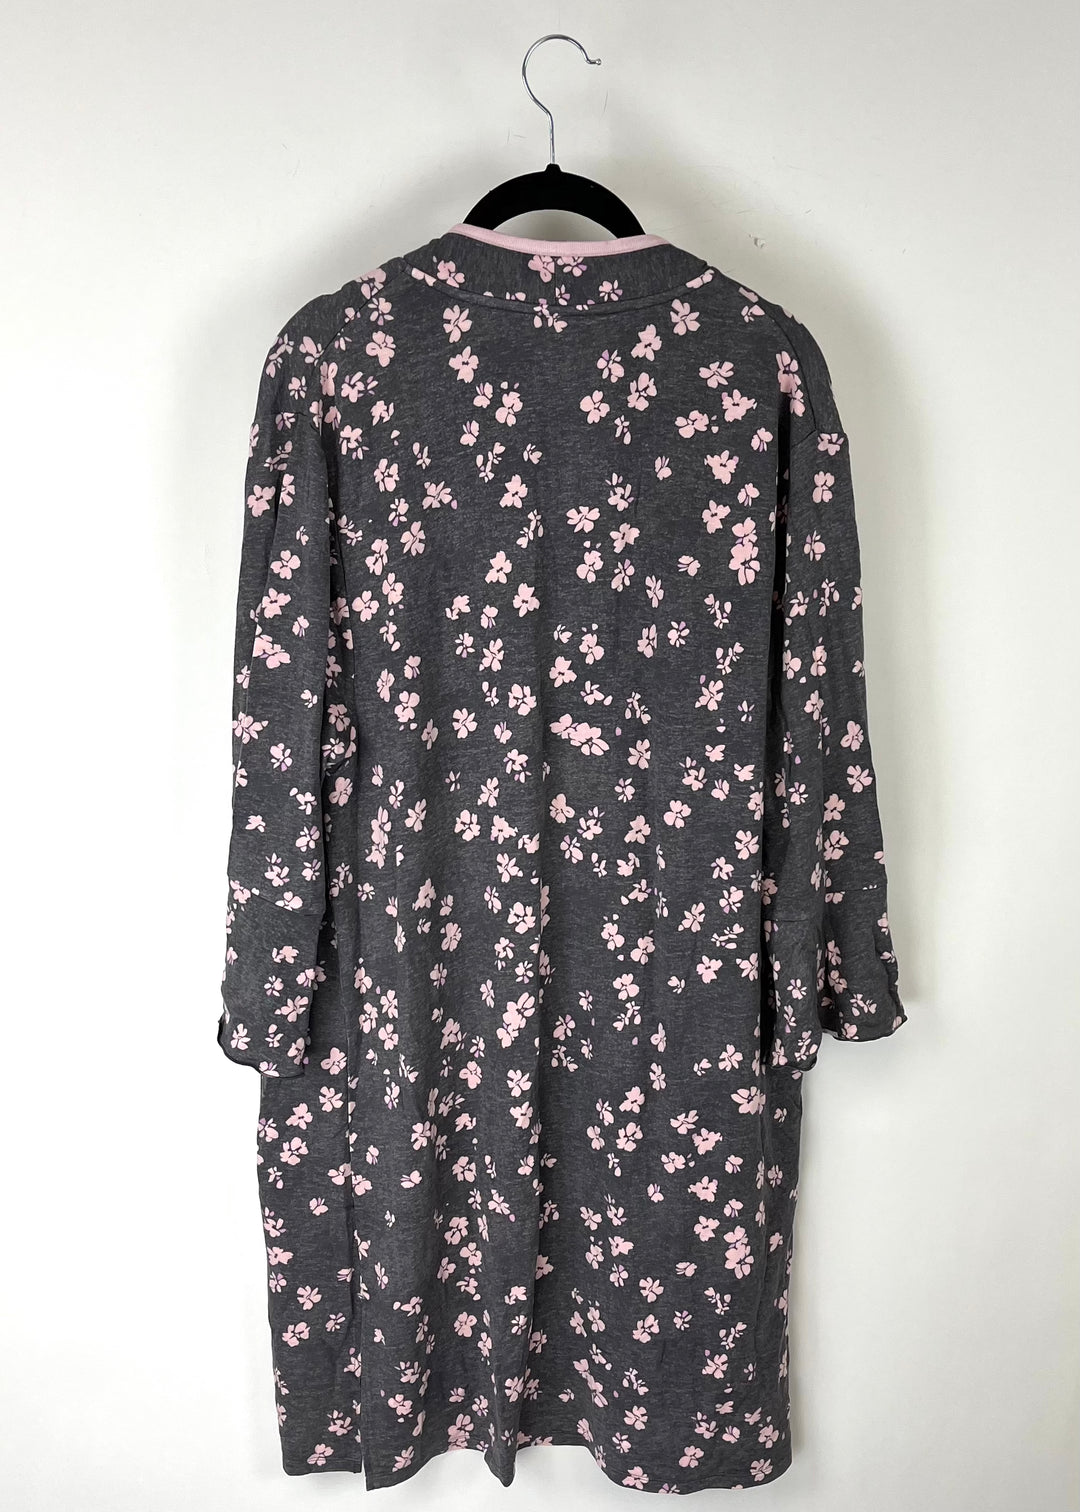 Grey And Pink Floral Robe - Small